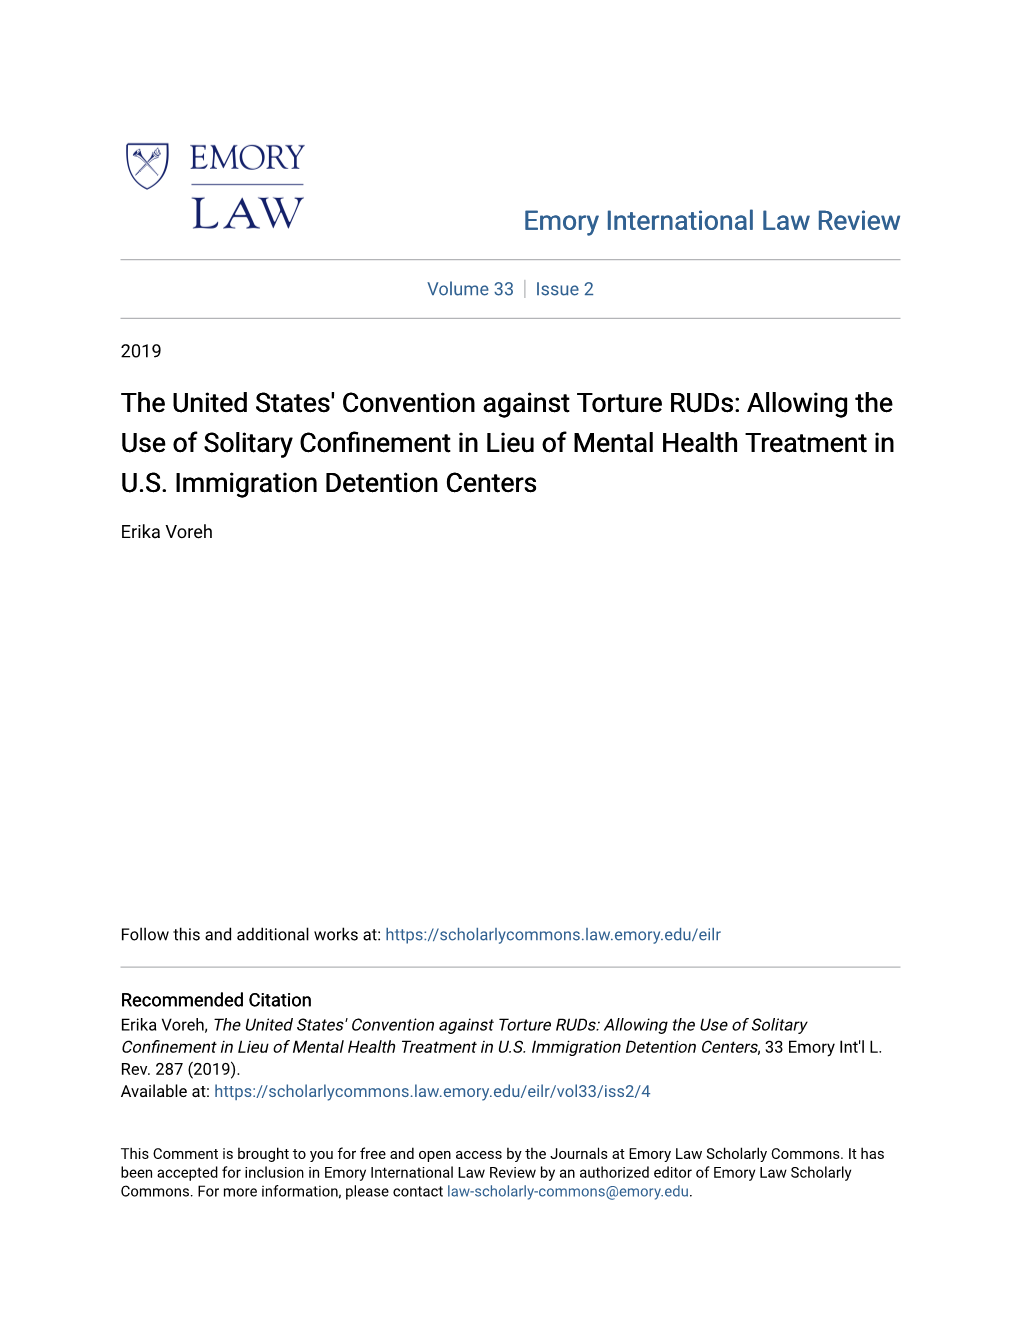 The United States' Convention Against Torture Ruds: Allowing the Use of Solitary Confinement in Lieu of Mental Health Treatm